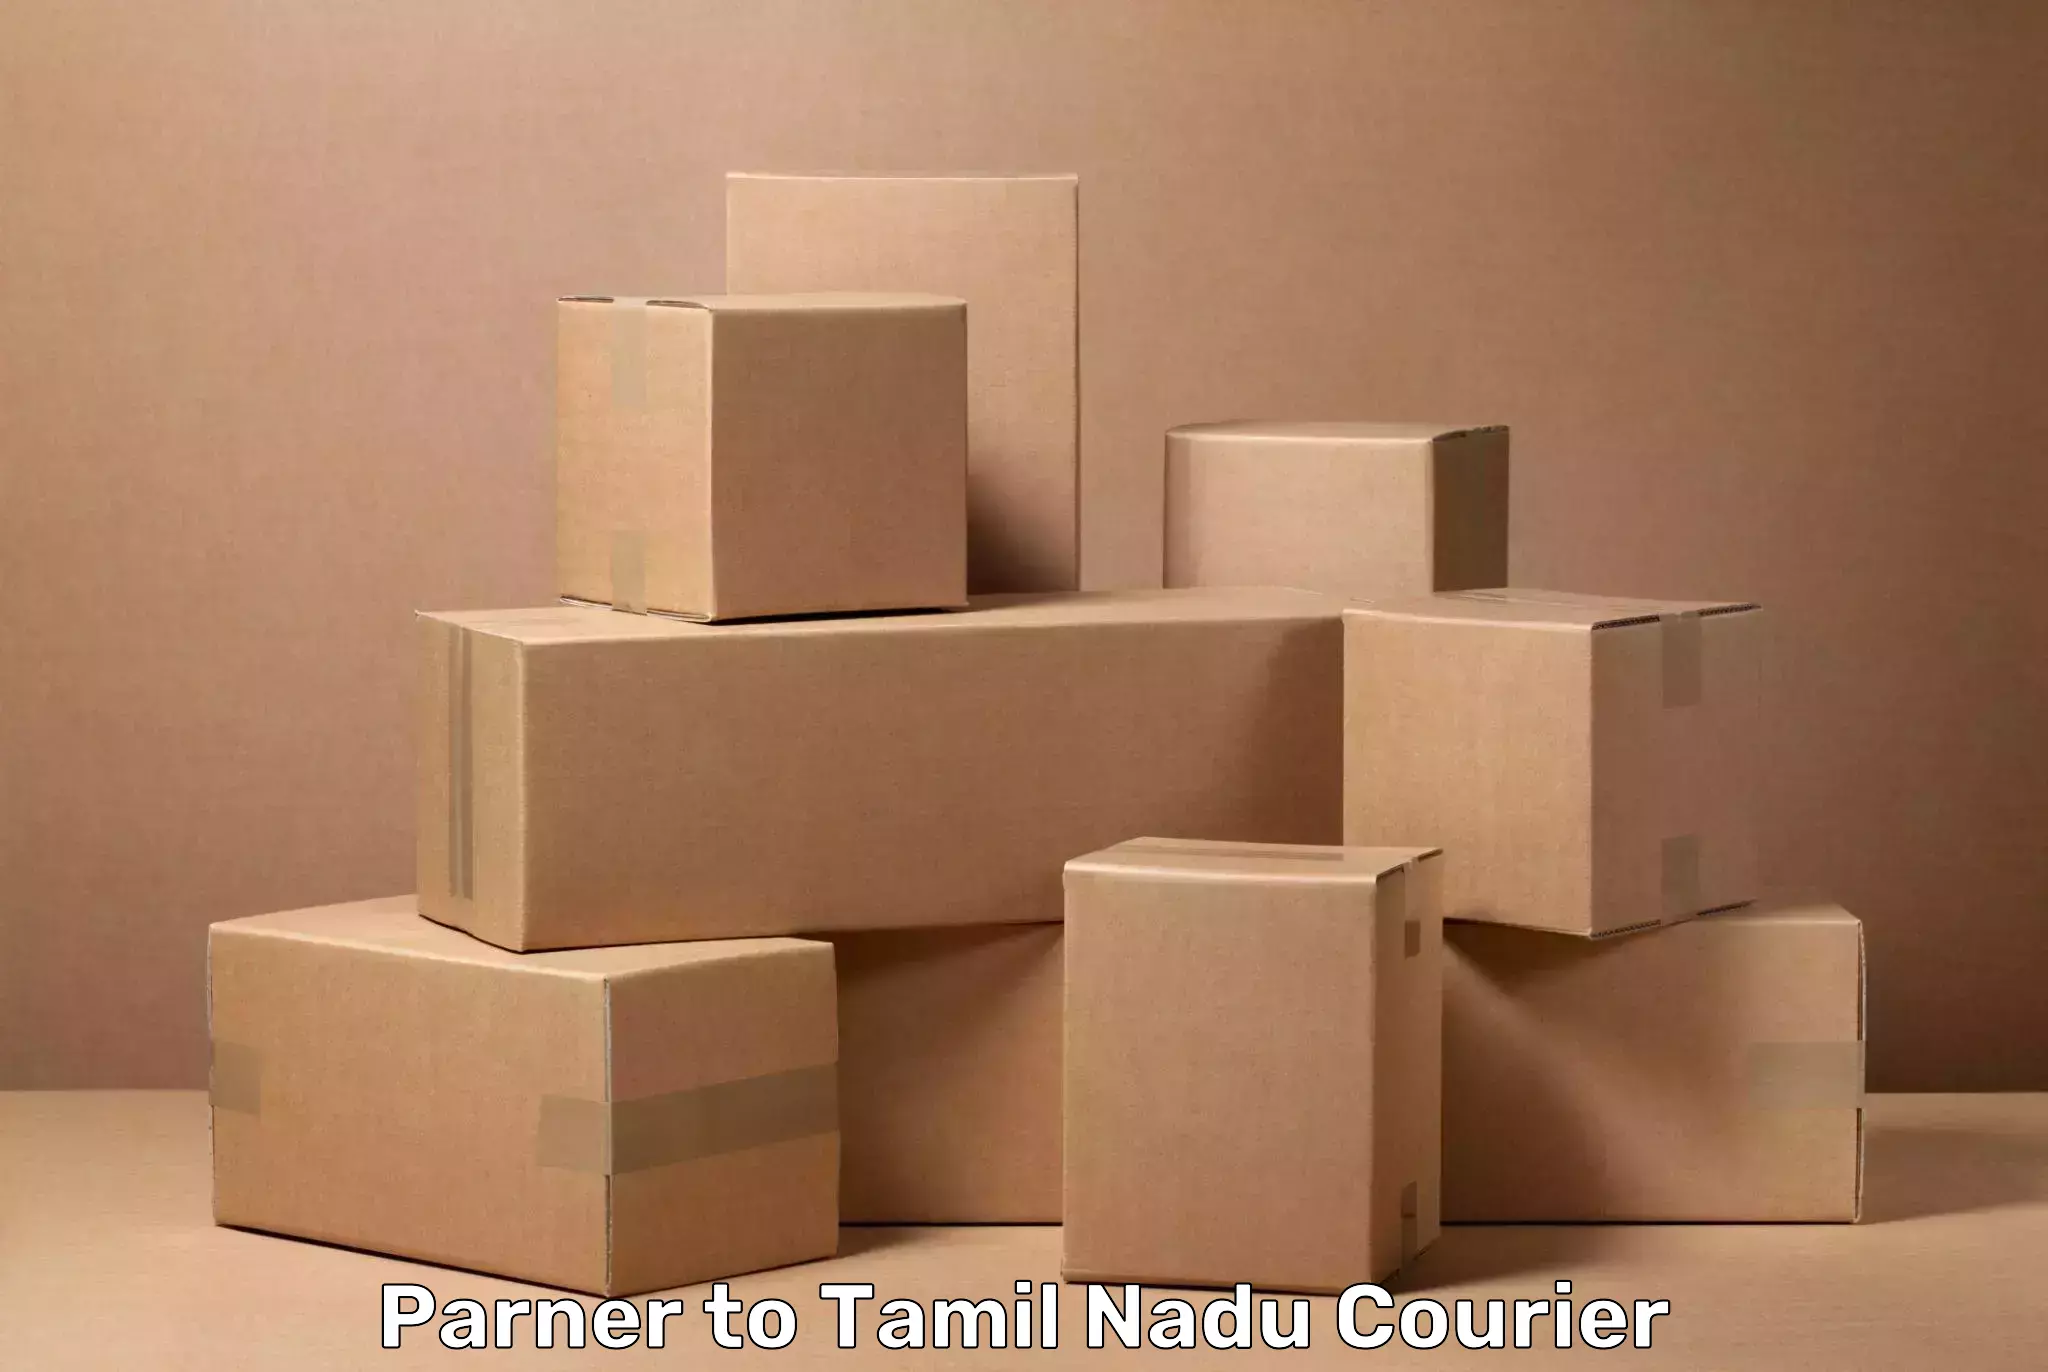 Luggage shipping service Parner to Tamil Nadu